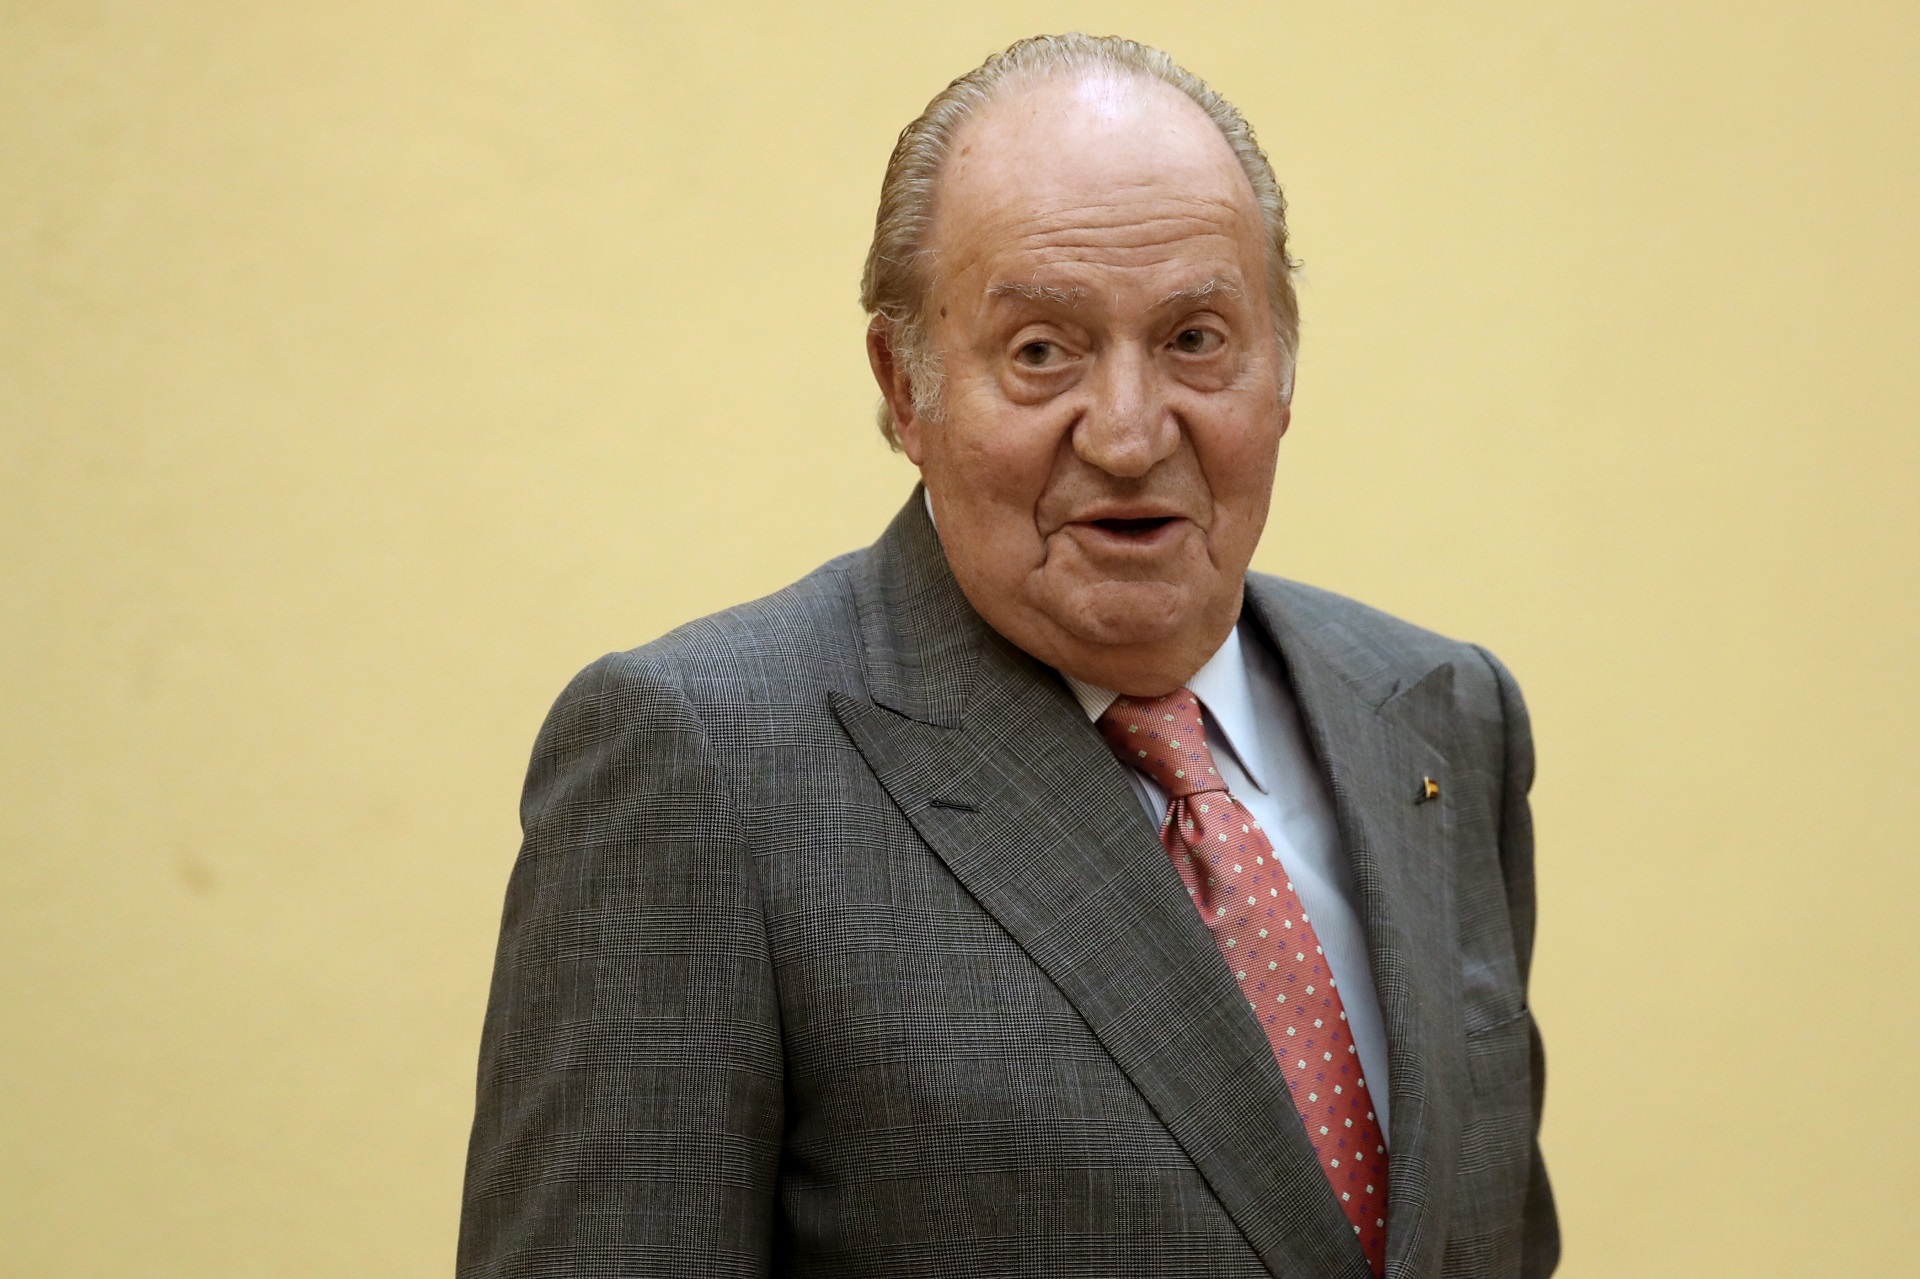 epa08582268 (FILE) - Spain King Juan Carlos I arrives for a meeting of the COTEC Foundation patronage at the Palace of El Pardo in Madrid, Spain, 31 May 2017 (reissued on 03 August 2020). Spanish Royal Household has announced that Emeritus King Juan Carlos I has proclaimed his intended decision to move abroad so as to not interfere in the image of the Spanish monarchy due to his alleged implication in a Swiss offshore account investigation. EFE/Sergio Barrenechea  EPA/Sergio Barrenechea